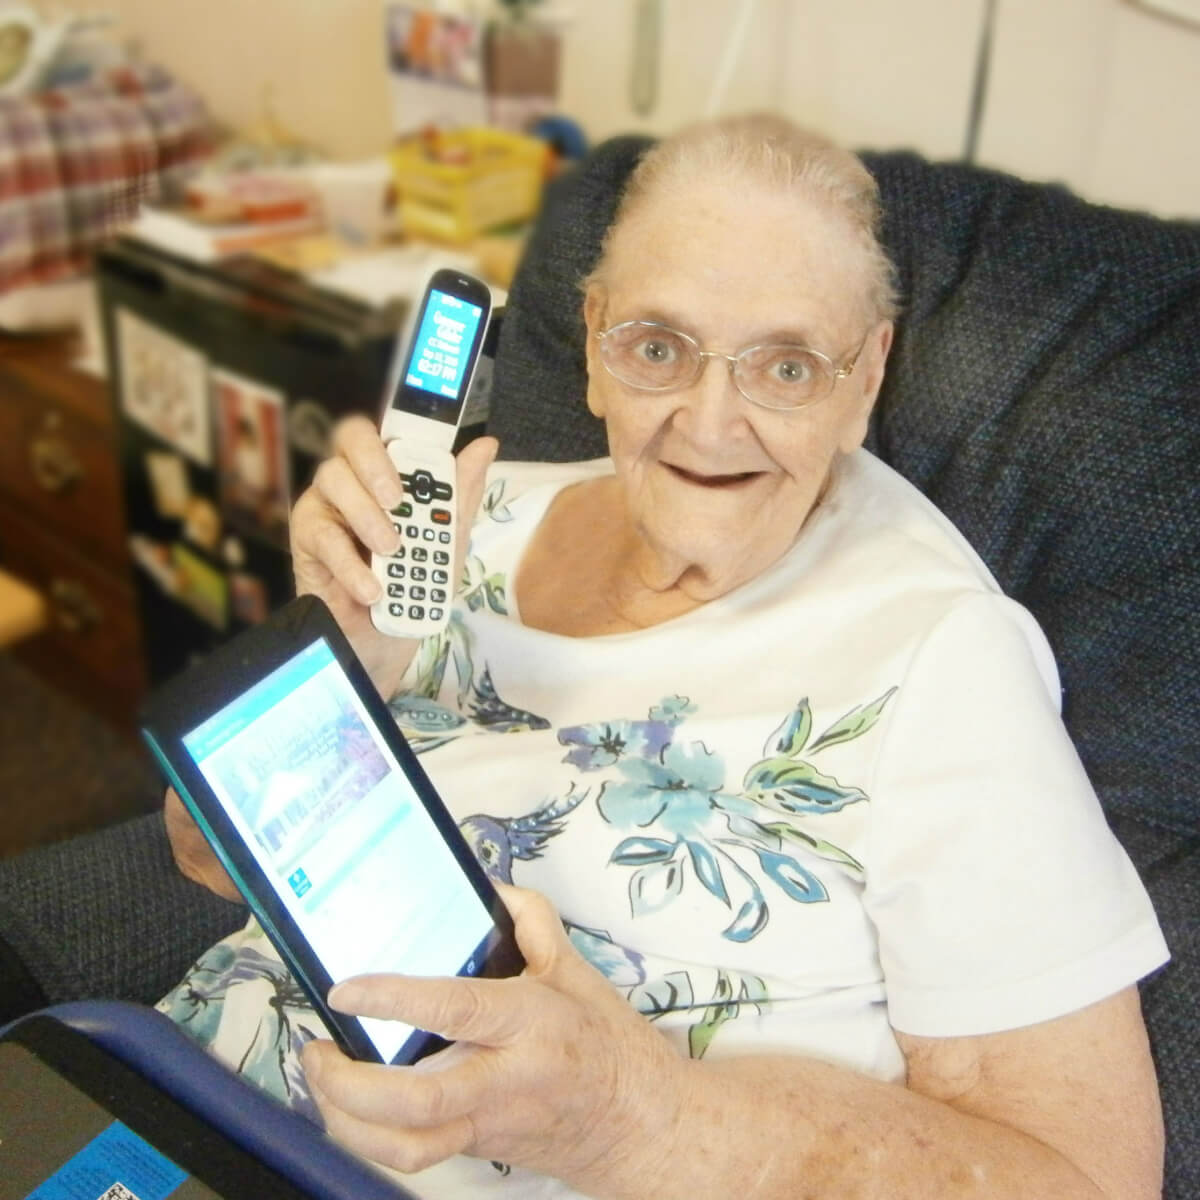 Kate Hagaman, a resident at Cambridge House, a DePaul Senior Living Community with her cell phone and tablet